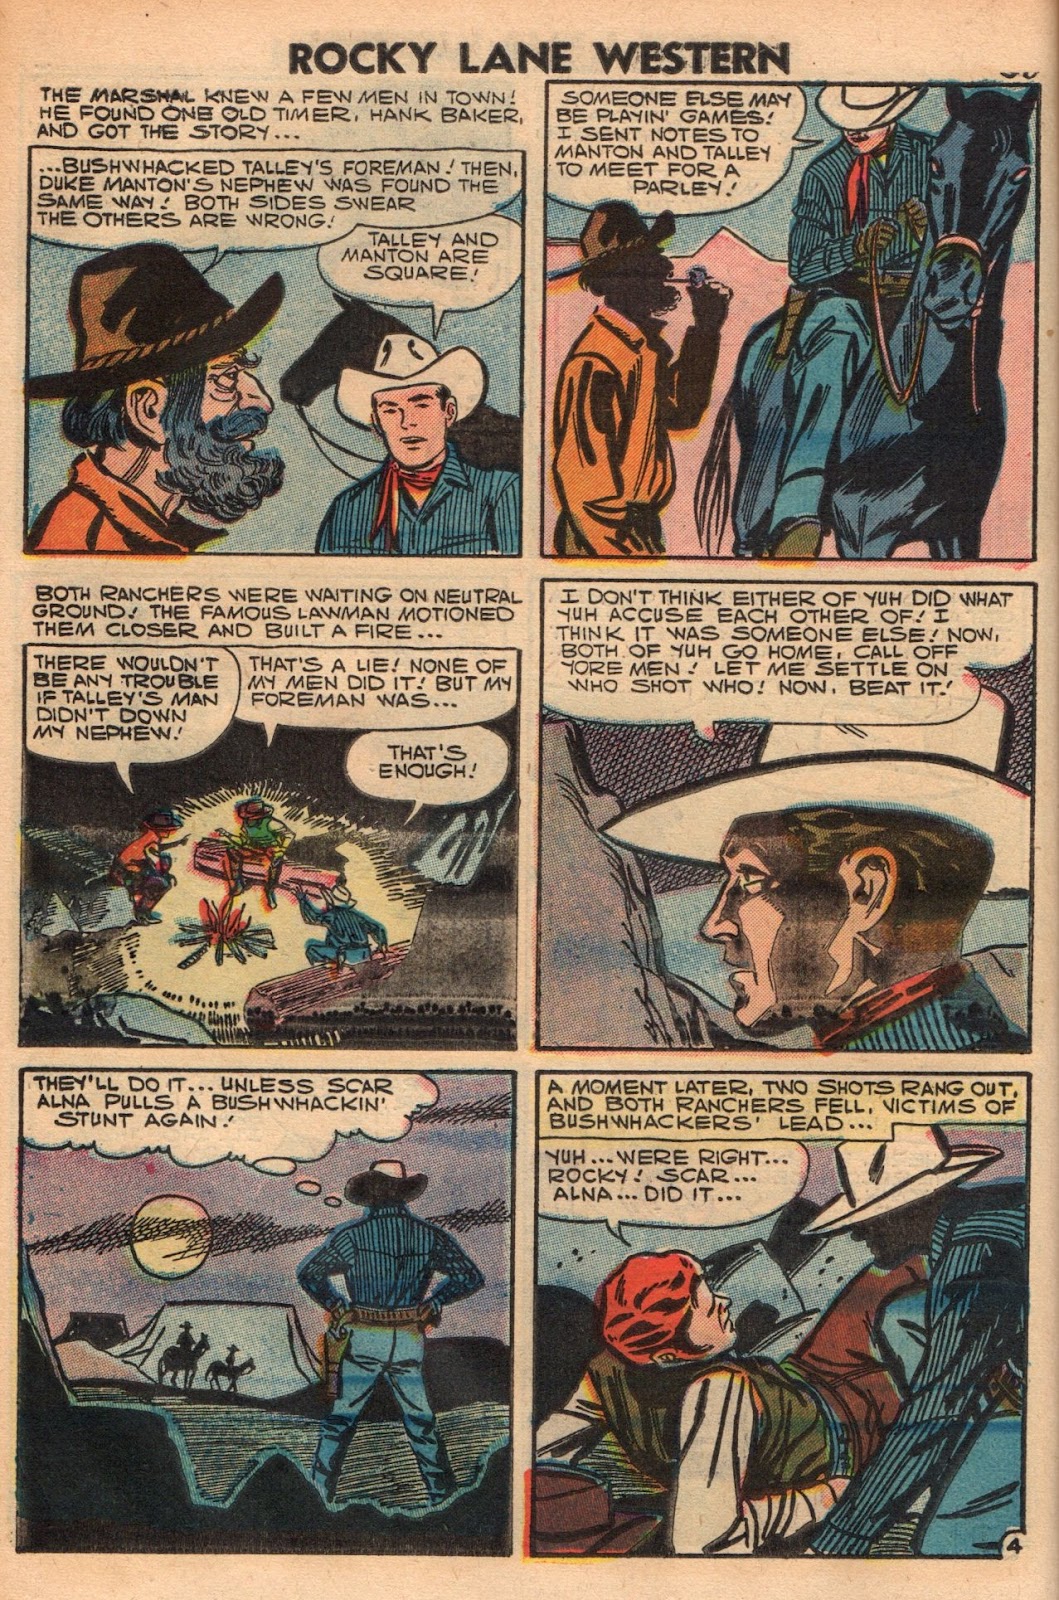 Rocky Lane Western (1954) issue 79 - Page 32